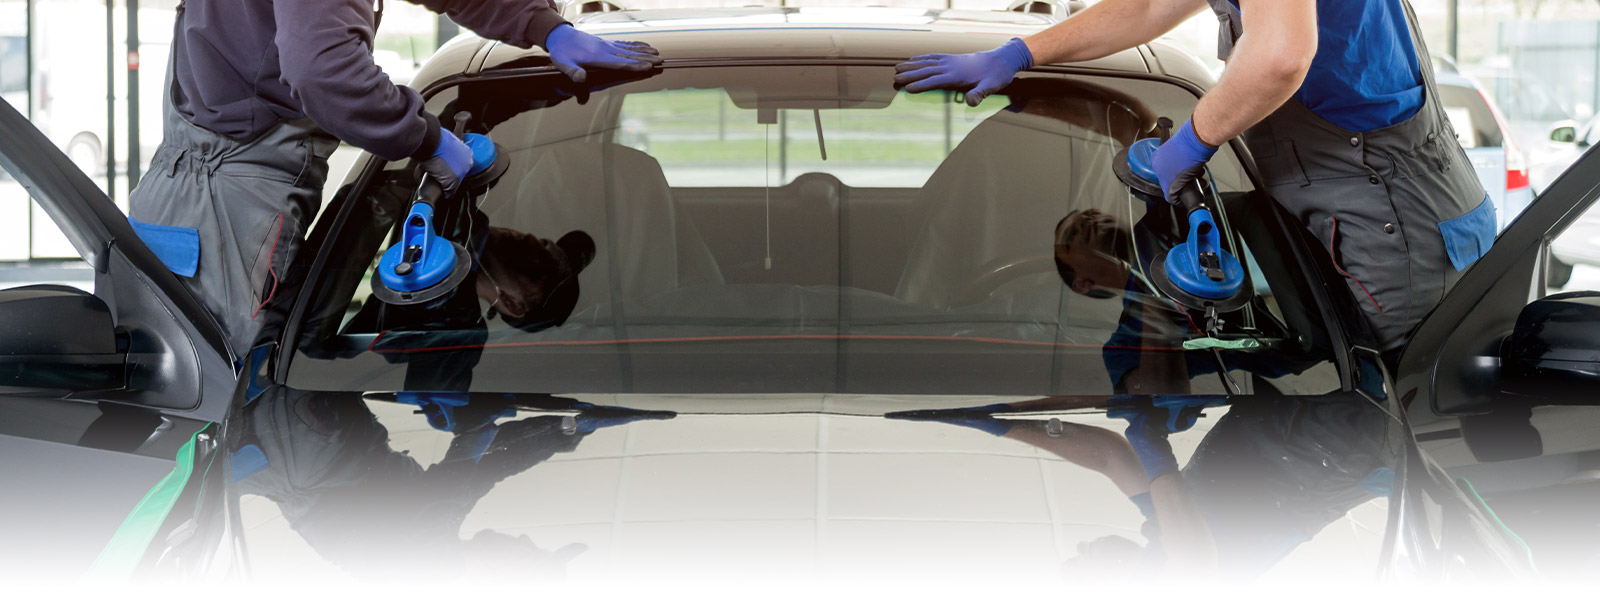 e can replace windshields in all types of vehicles, foreign, domestic, cars, trucks, SUVs and commercial vehicles.